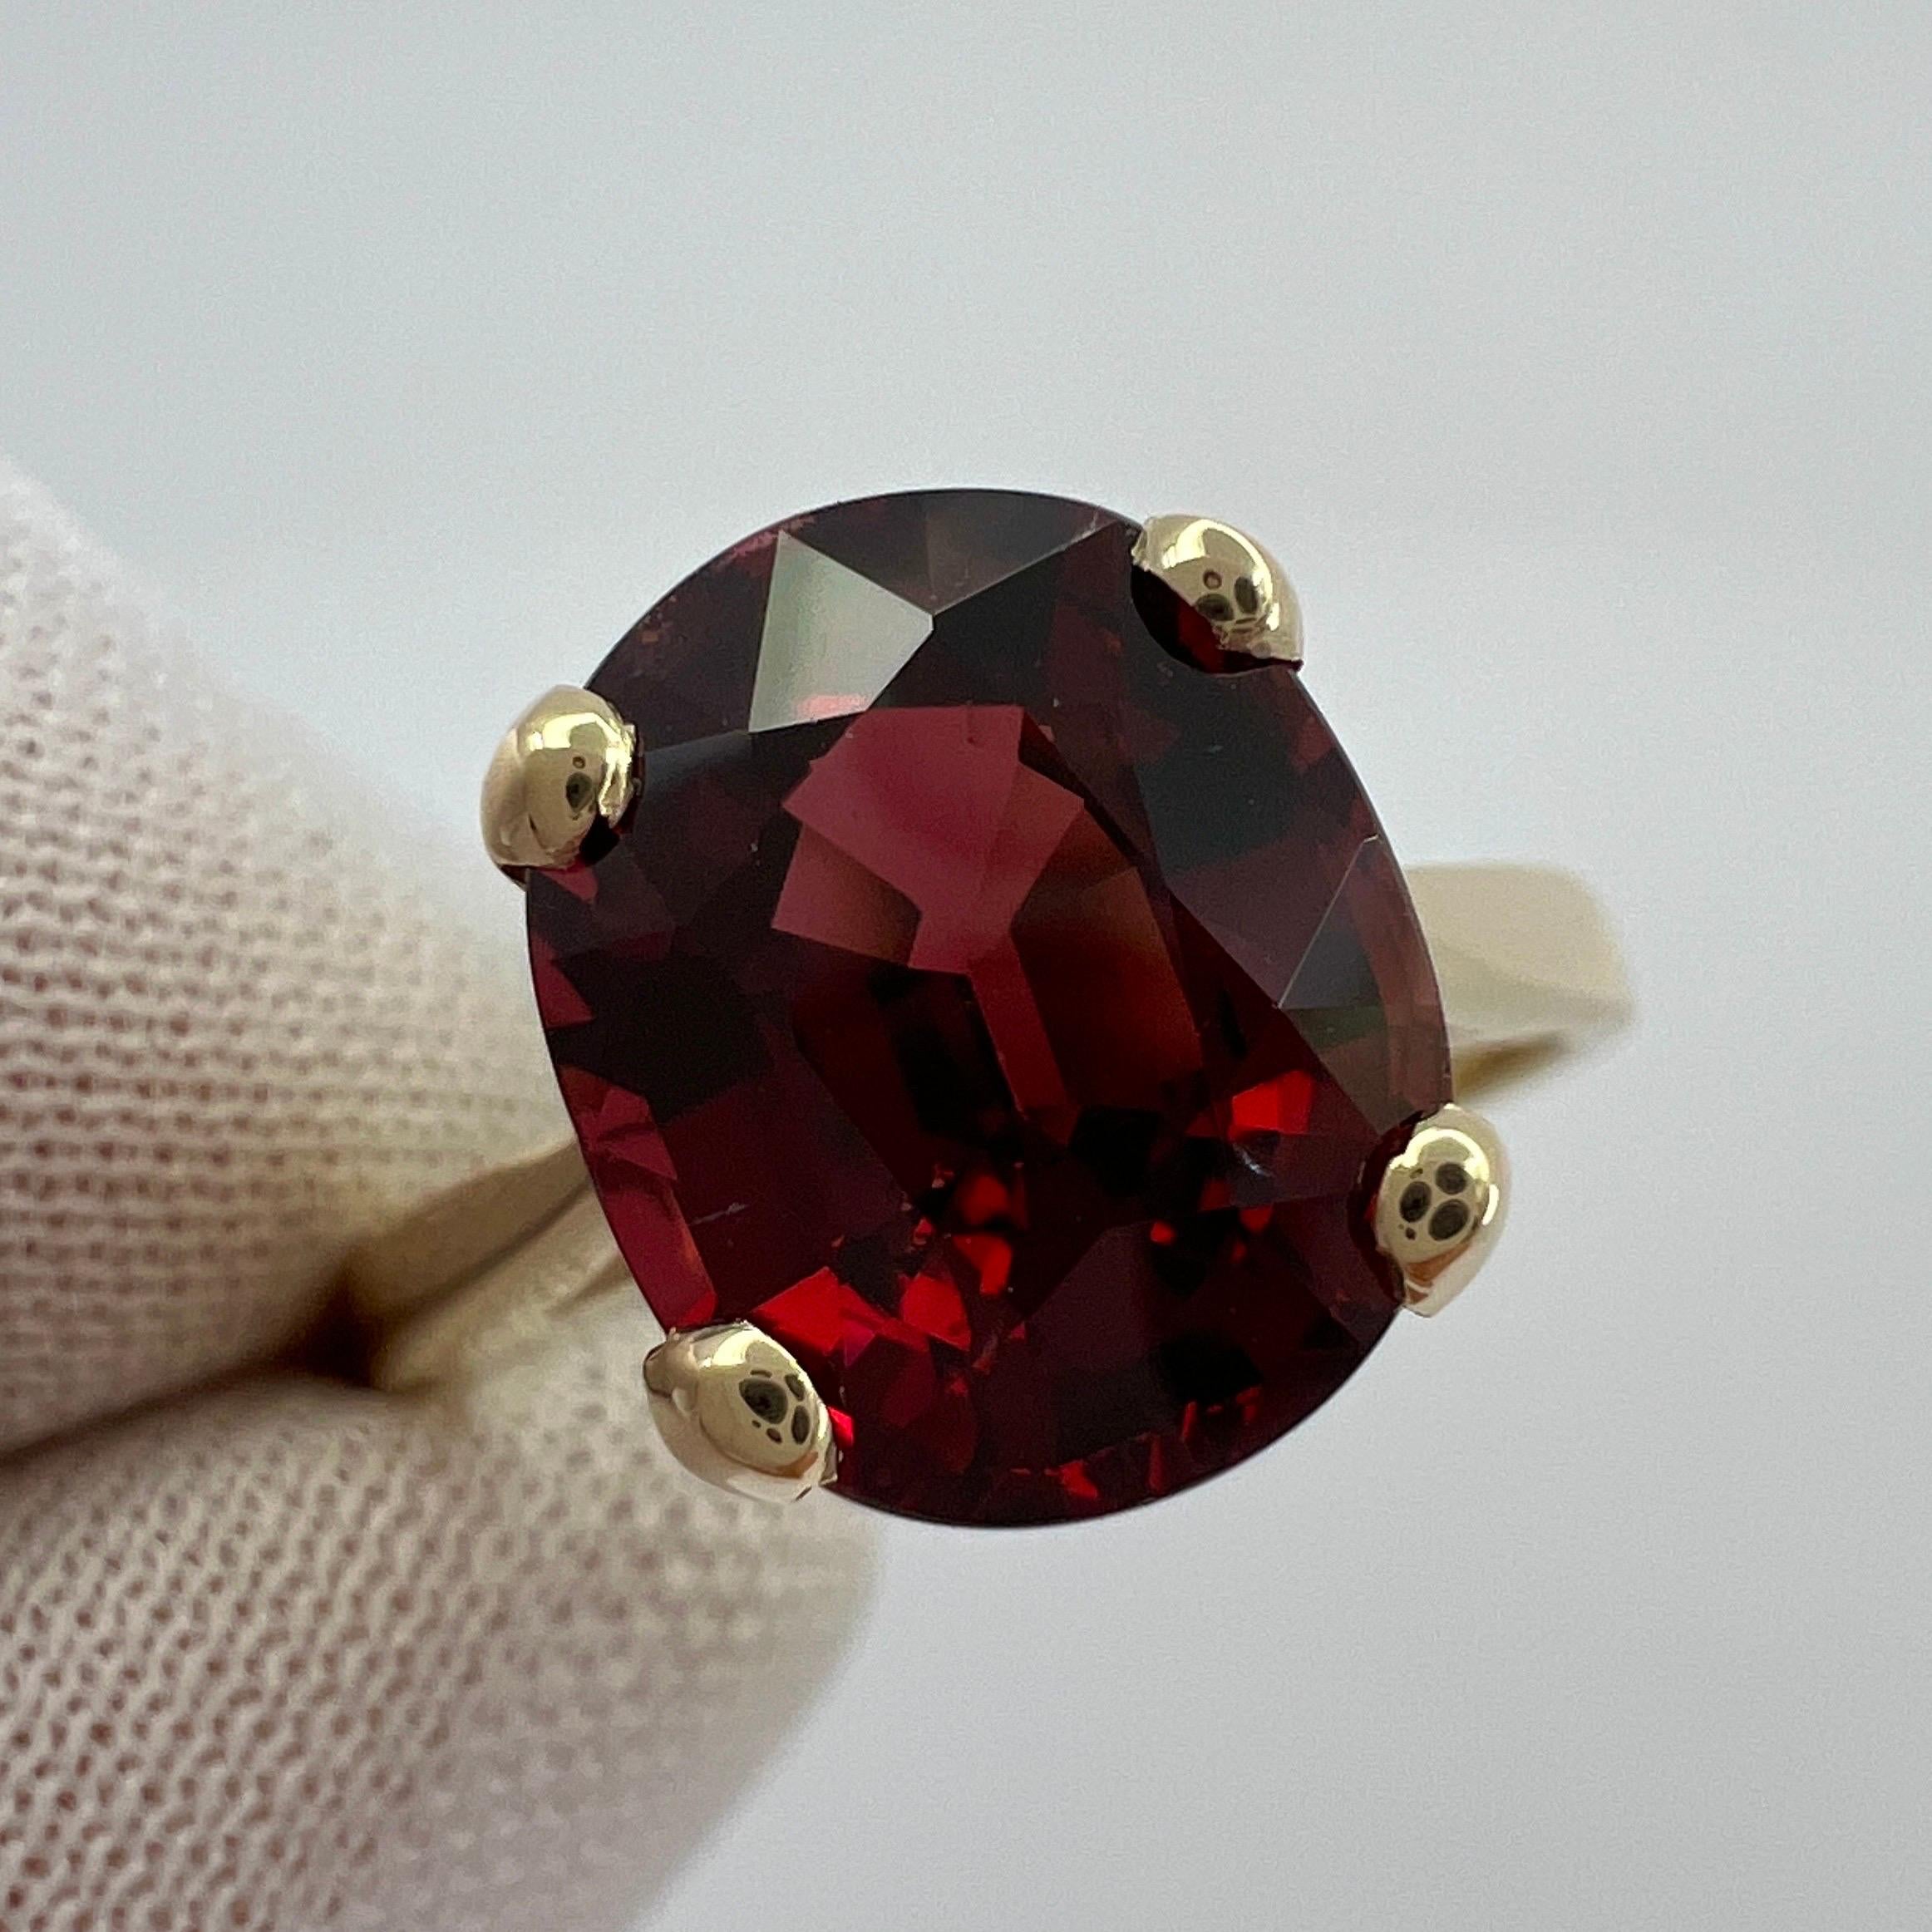 Vivid Cherry Red Rhodolite Garnet Oval Cut Yellow Gold Solitaire Ring.

4.00 Carat garnet with a stunning vivid cherry red colour and very good clarity, very clean stone.

Also has an excellent quality oval cut which shows the fine colour to best